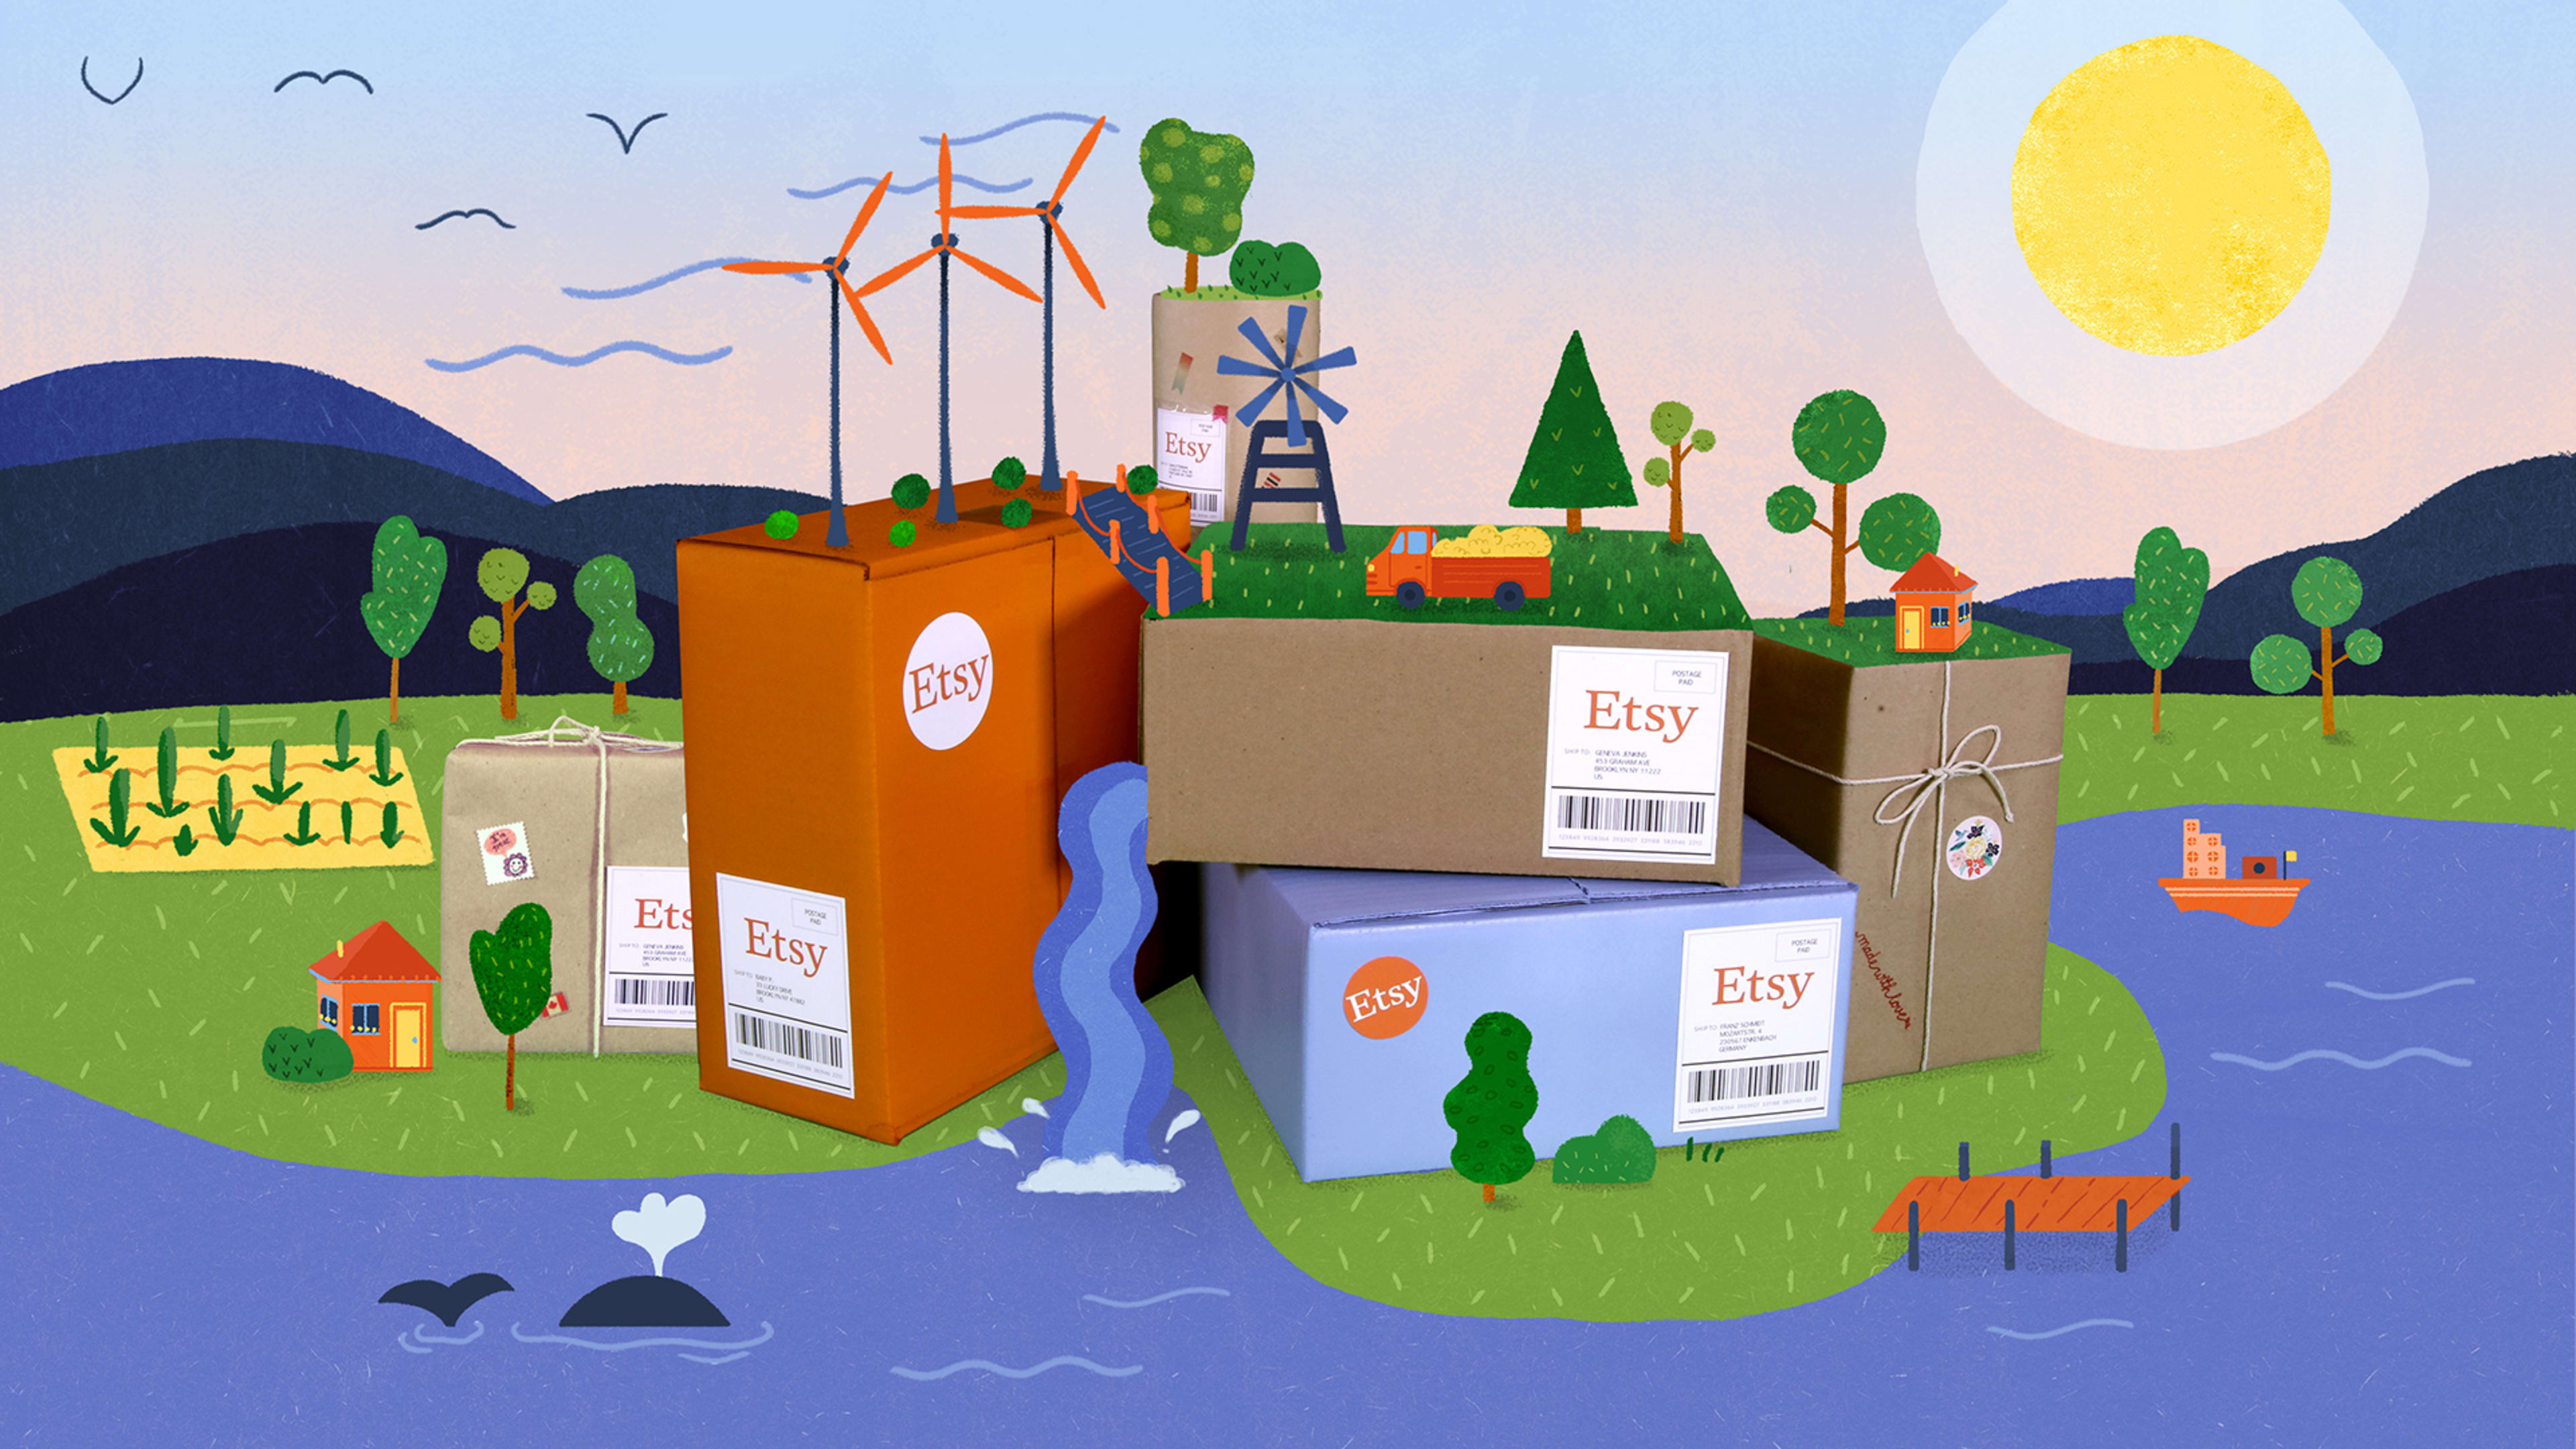 Etsy just became the first global e-commerce company to offset all of its shipping emissions